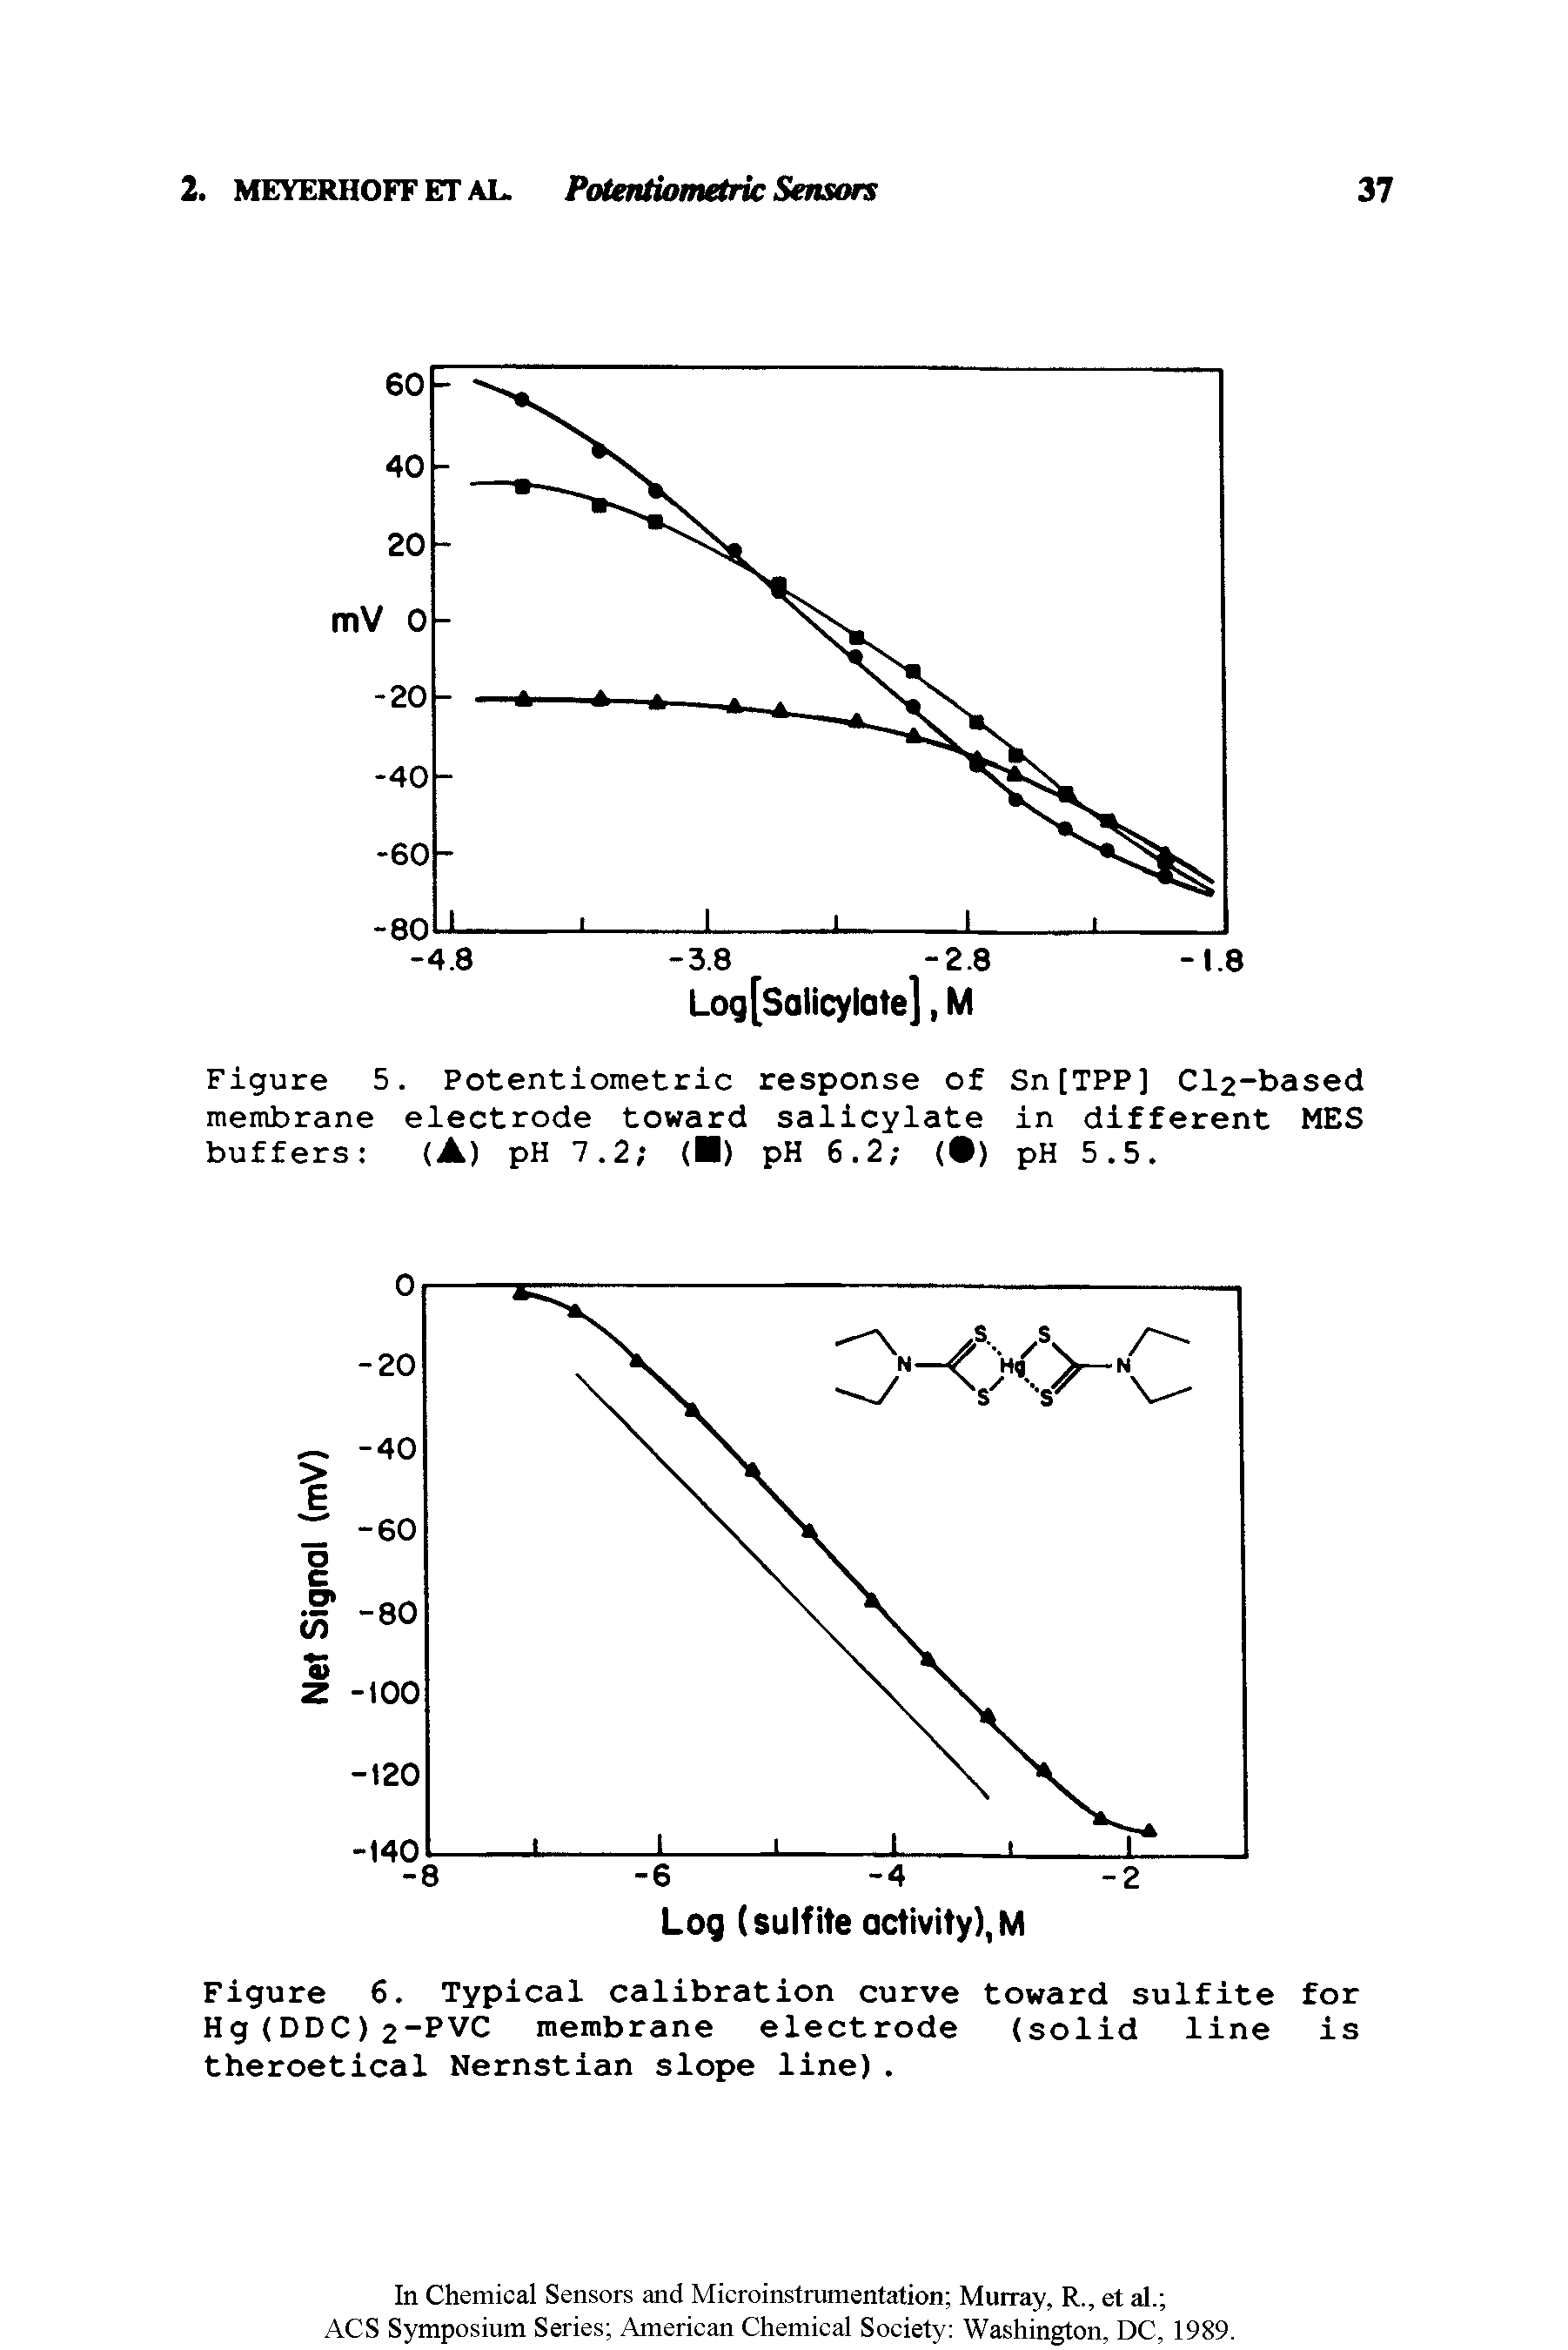 Figure 6. Typical calibration curve toward sulfite for Hg(DDC)2 PVC membrane electrode (solid line is theroetical Nernstian slope line).